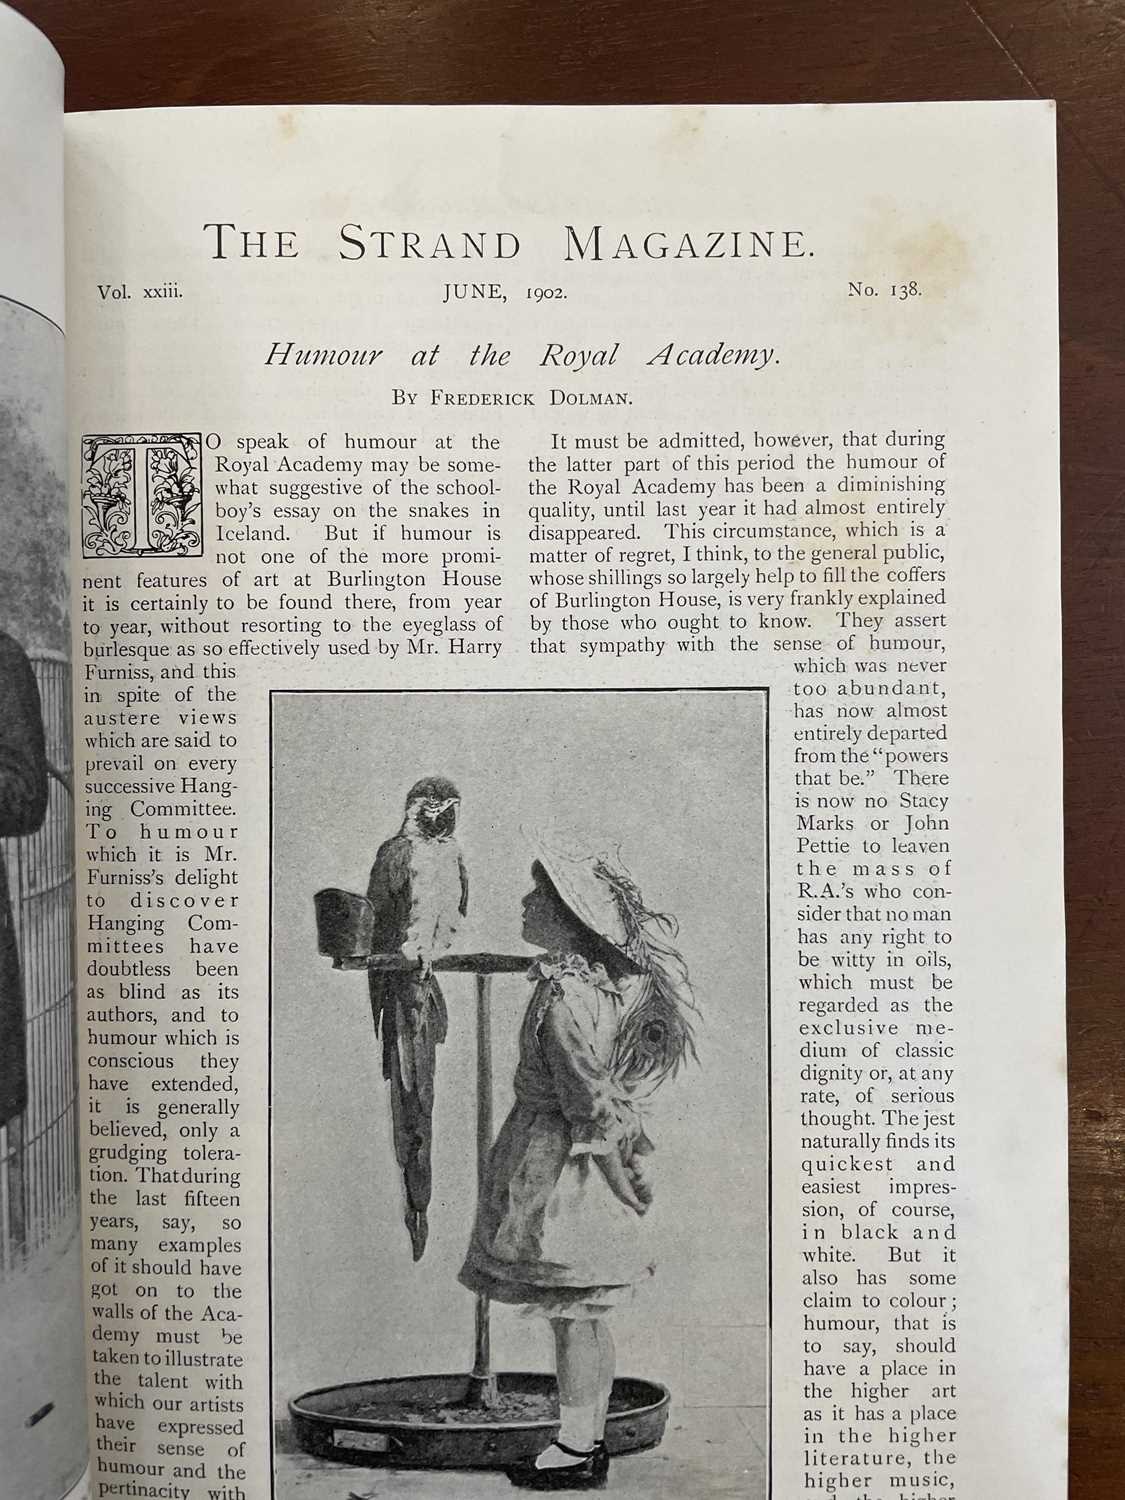 (Arthur Conan Doyle contributor). 'The Strand Magazine' Assorted issues in original parts - Image 31 of 45